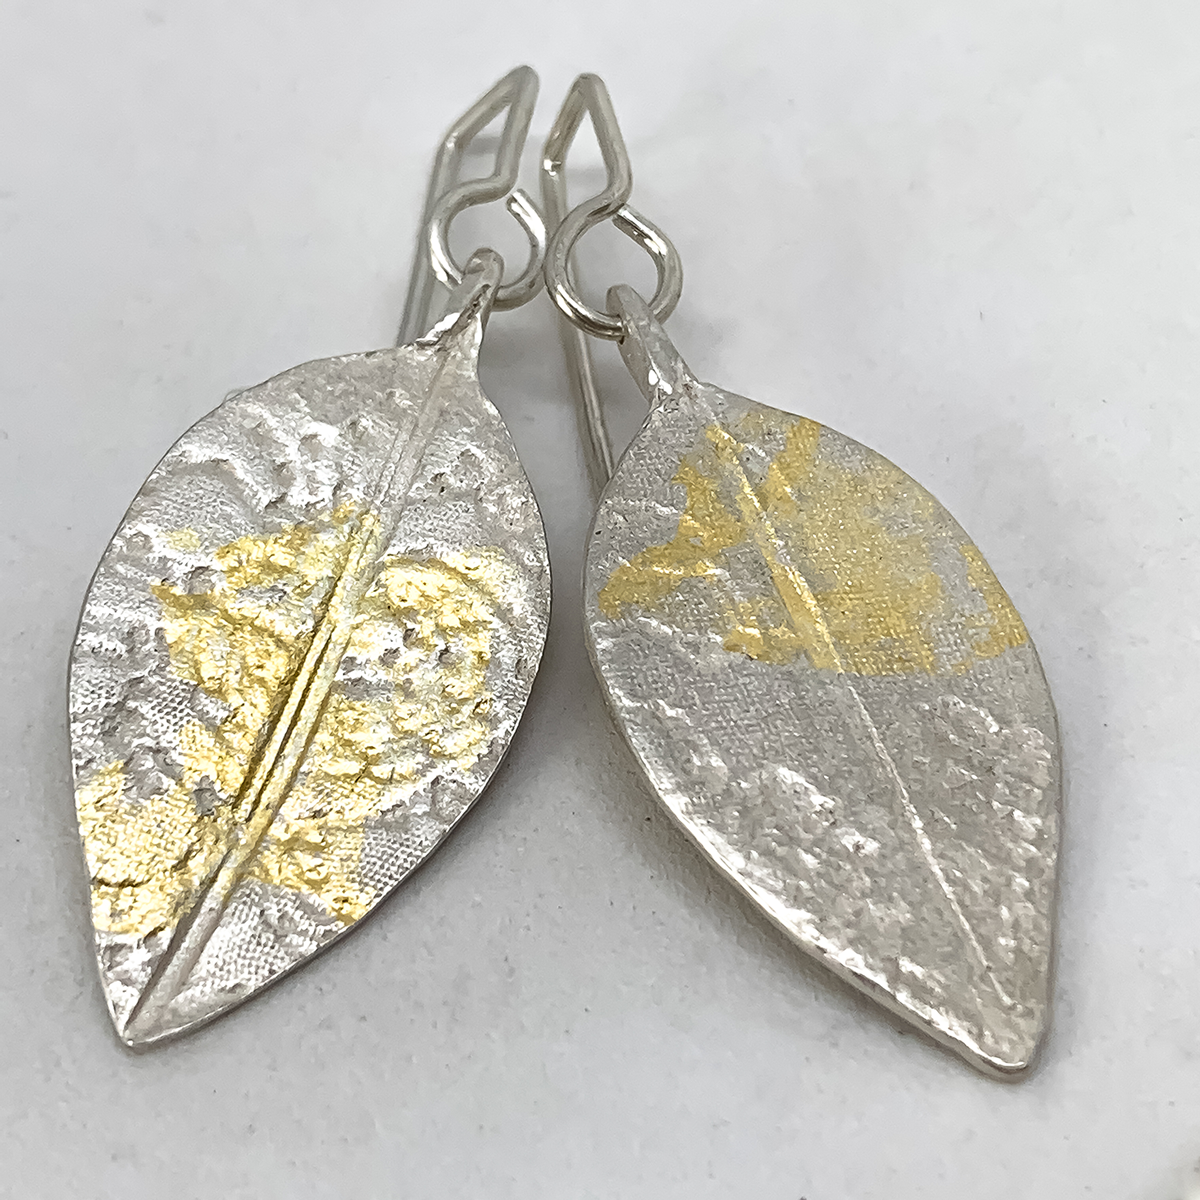 A pair of stylised leaf earrings with lace embossed into the surface and random patterns of 24ct Gold leaf applied like sunlight dappling the surface